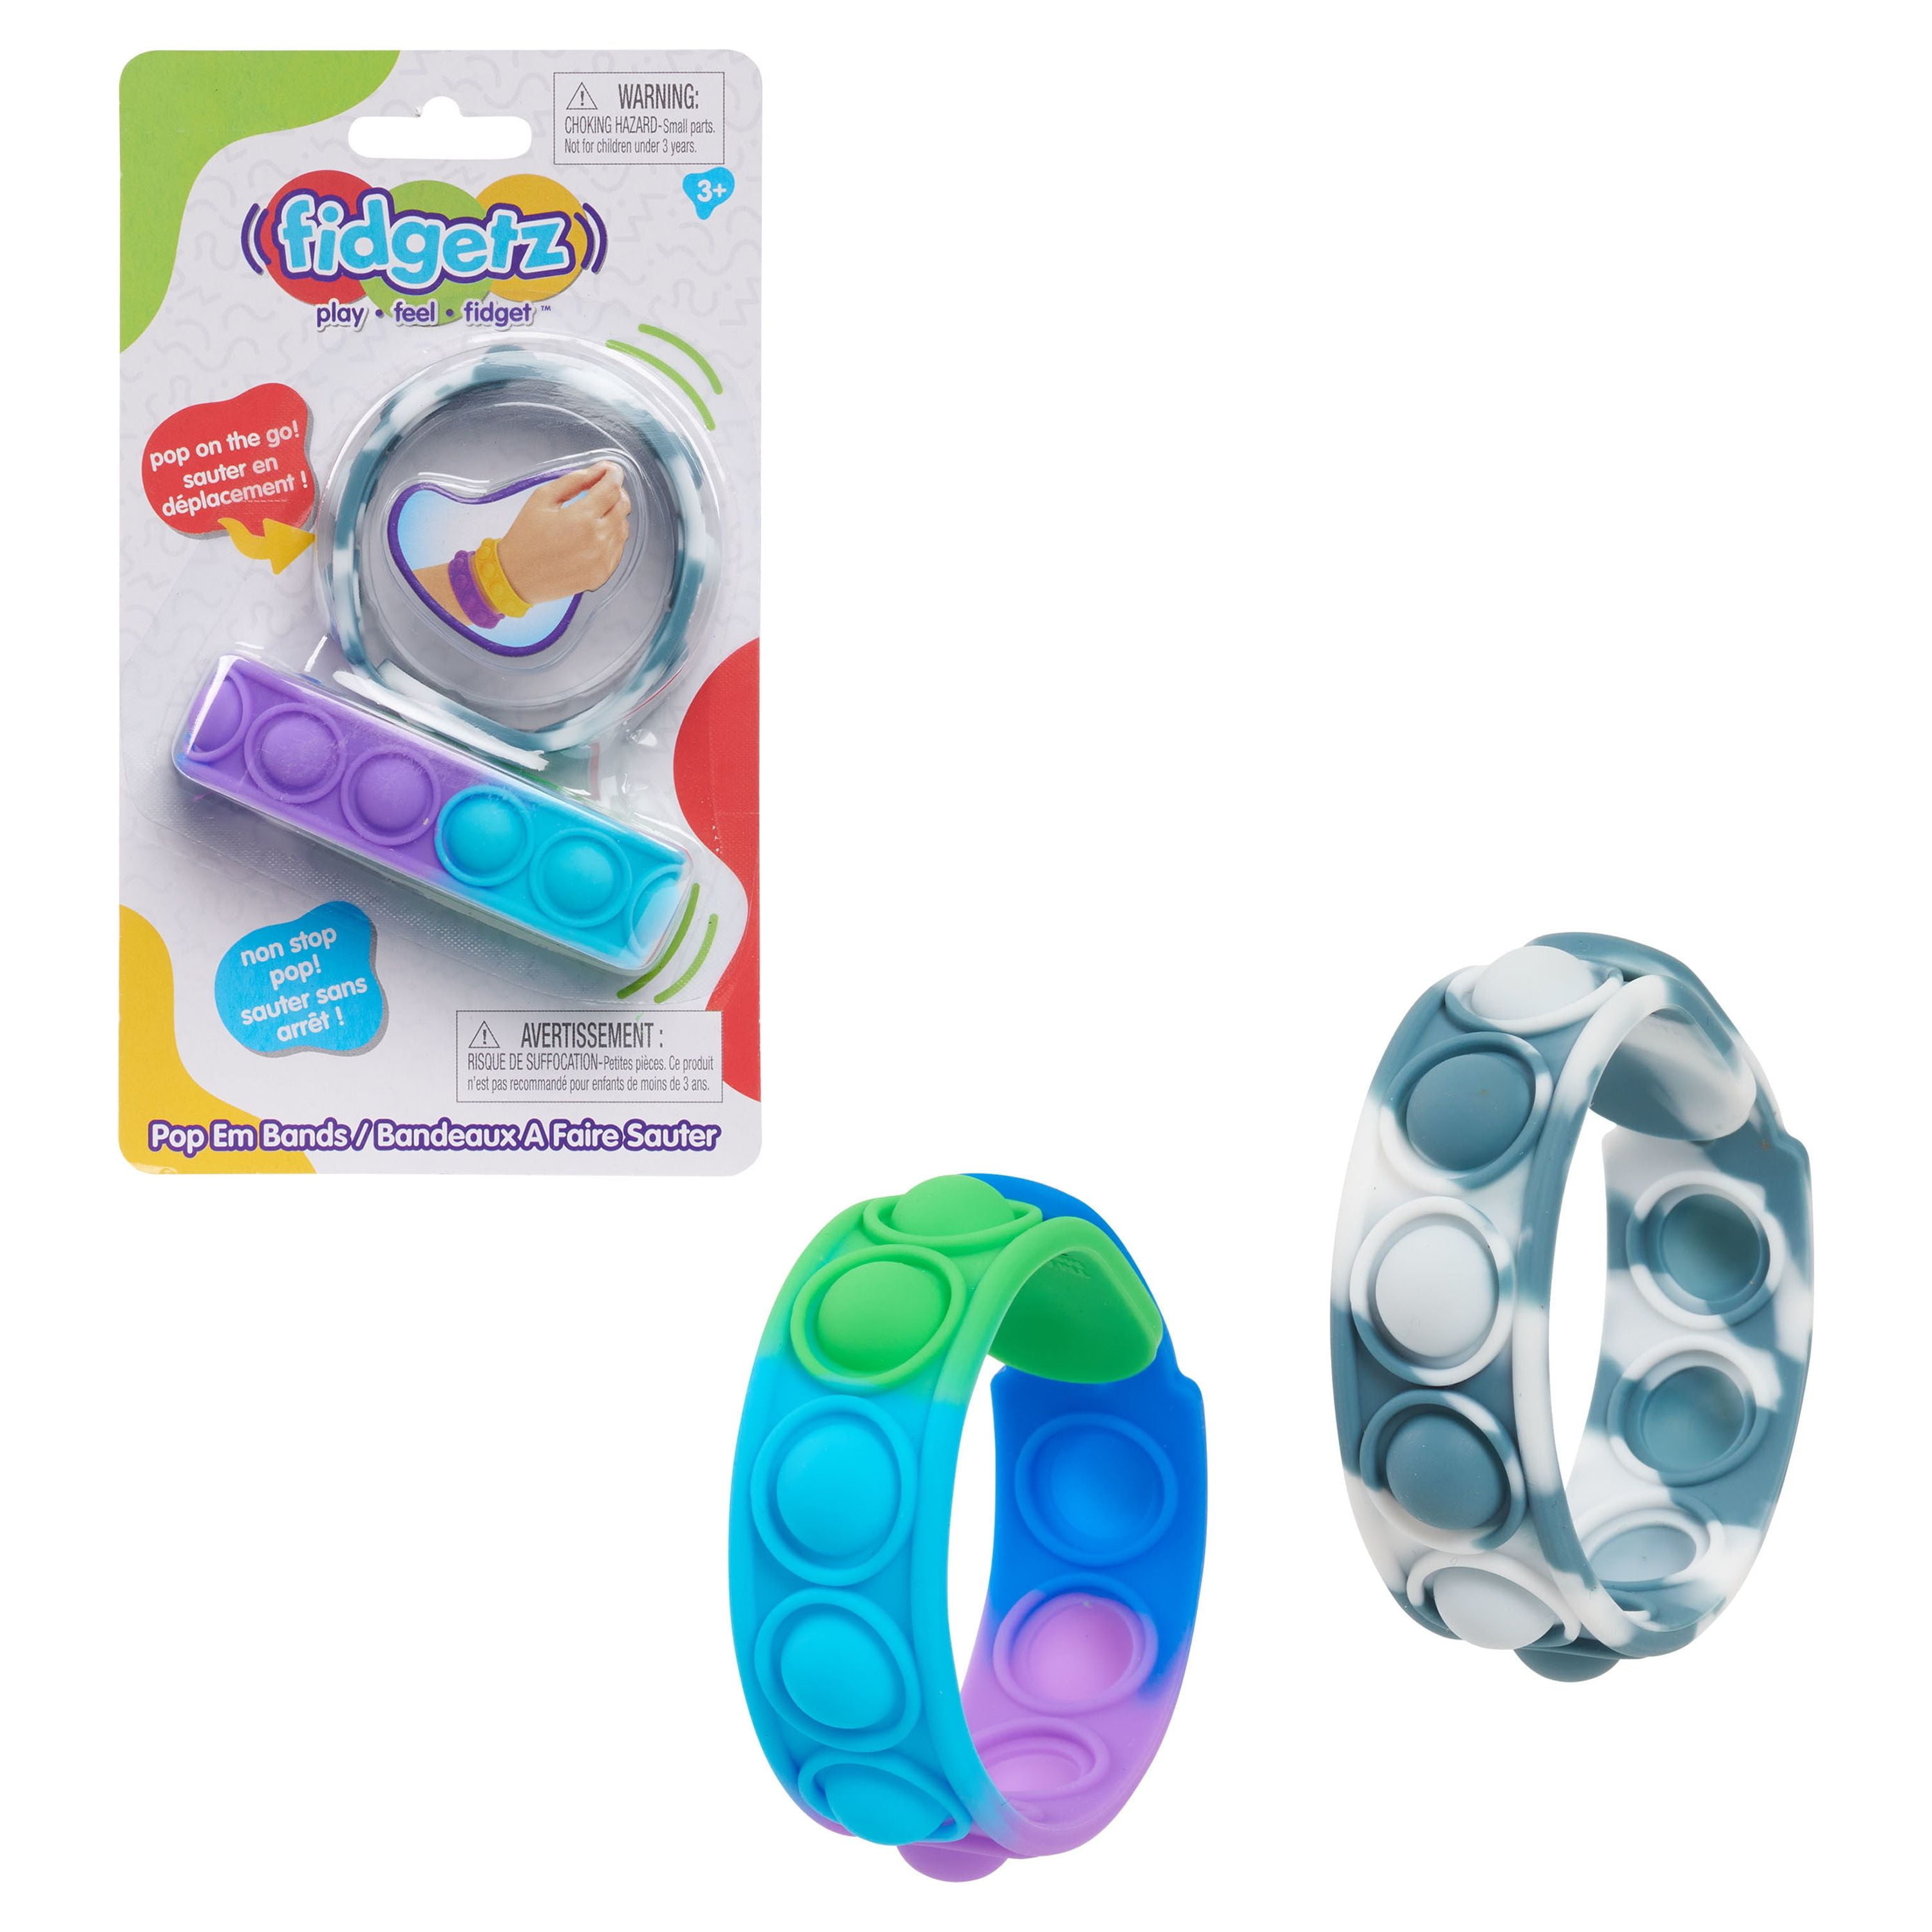 Fidgetz Pop Em's Bands Fidget Toys, Button Sensory Toys for Kids and  Adults, Anxiety and Stress Relief Toys, Assortment, Styles May Vary, Kids  Toys for Ages 3 Up, Gifts and Presents 